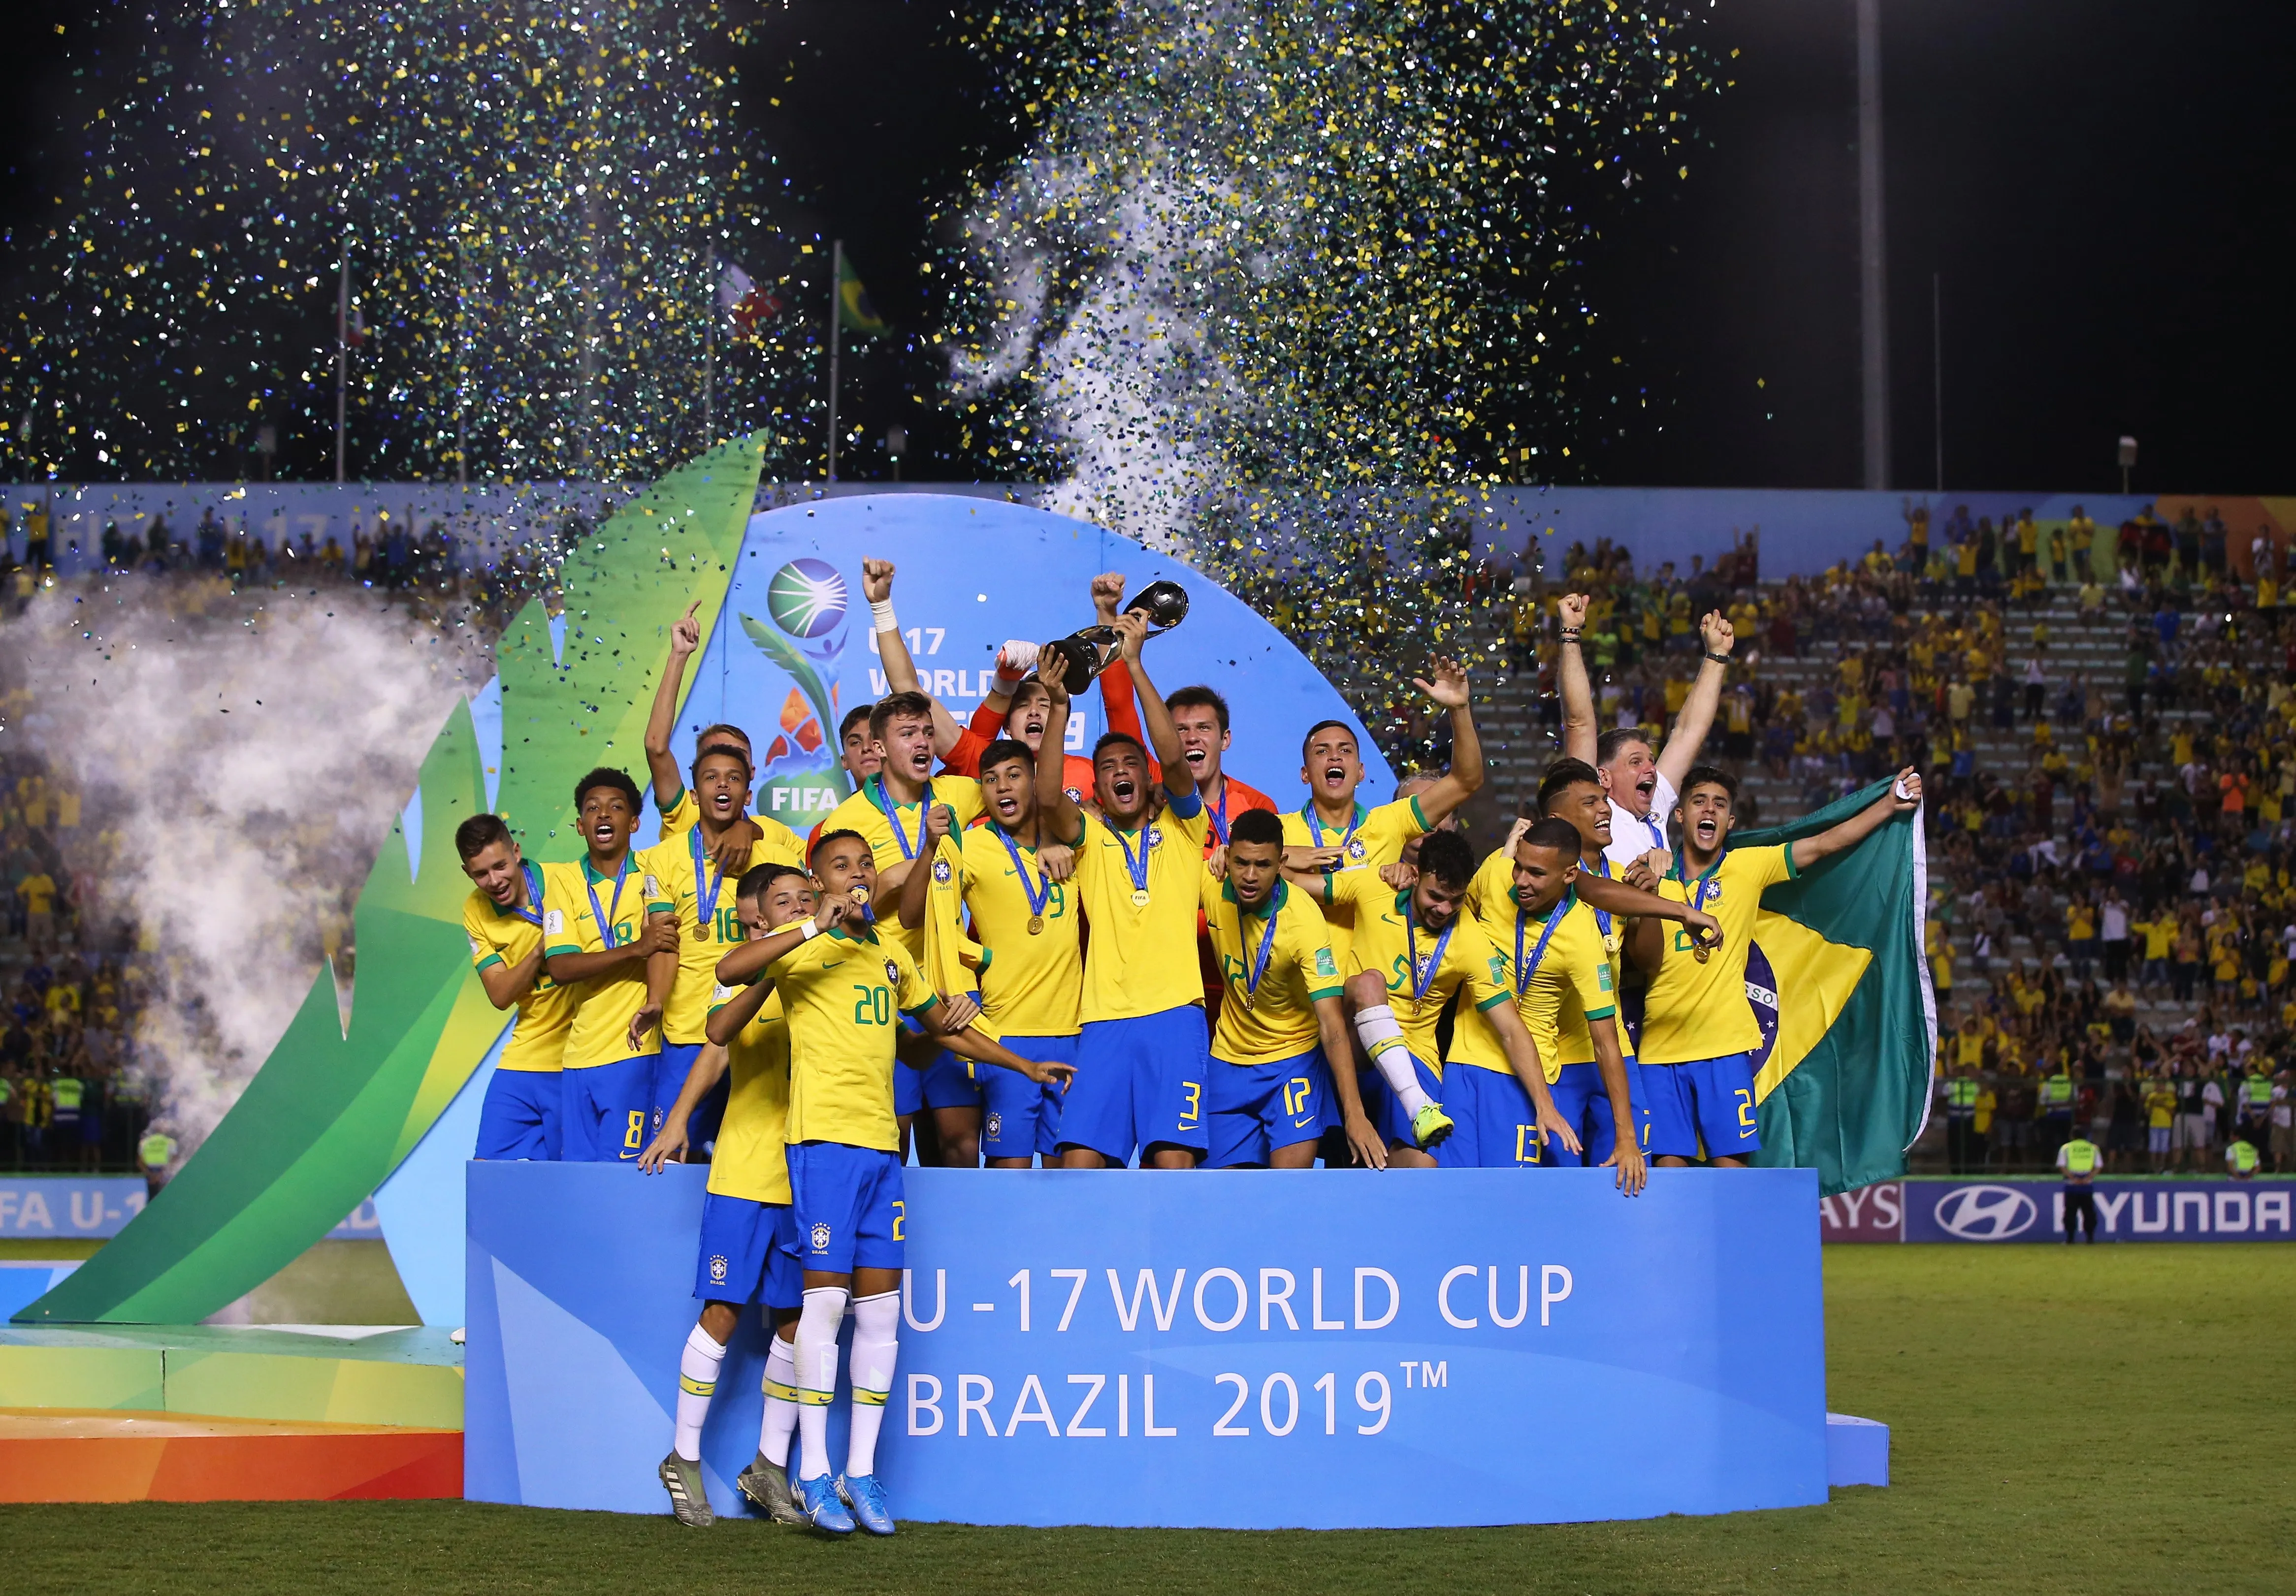 In 2019, Brazil became the second team to win the FIFAU-17 World Cup at their home.  